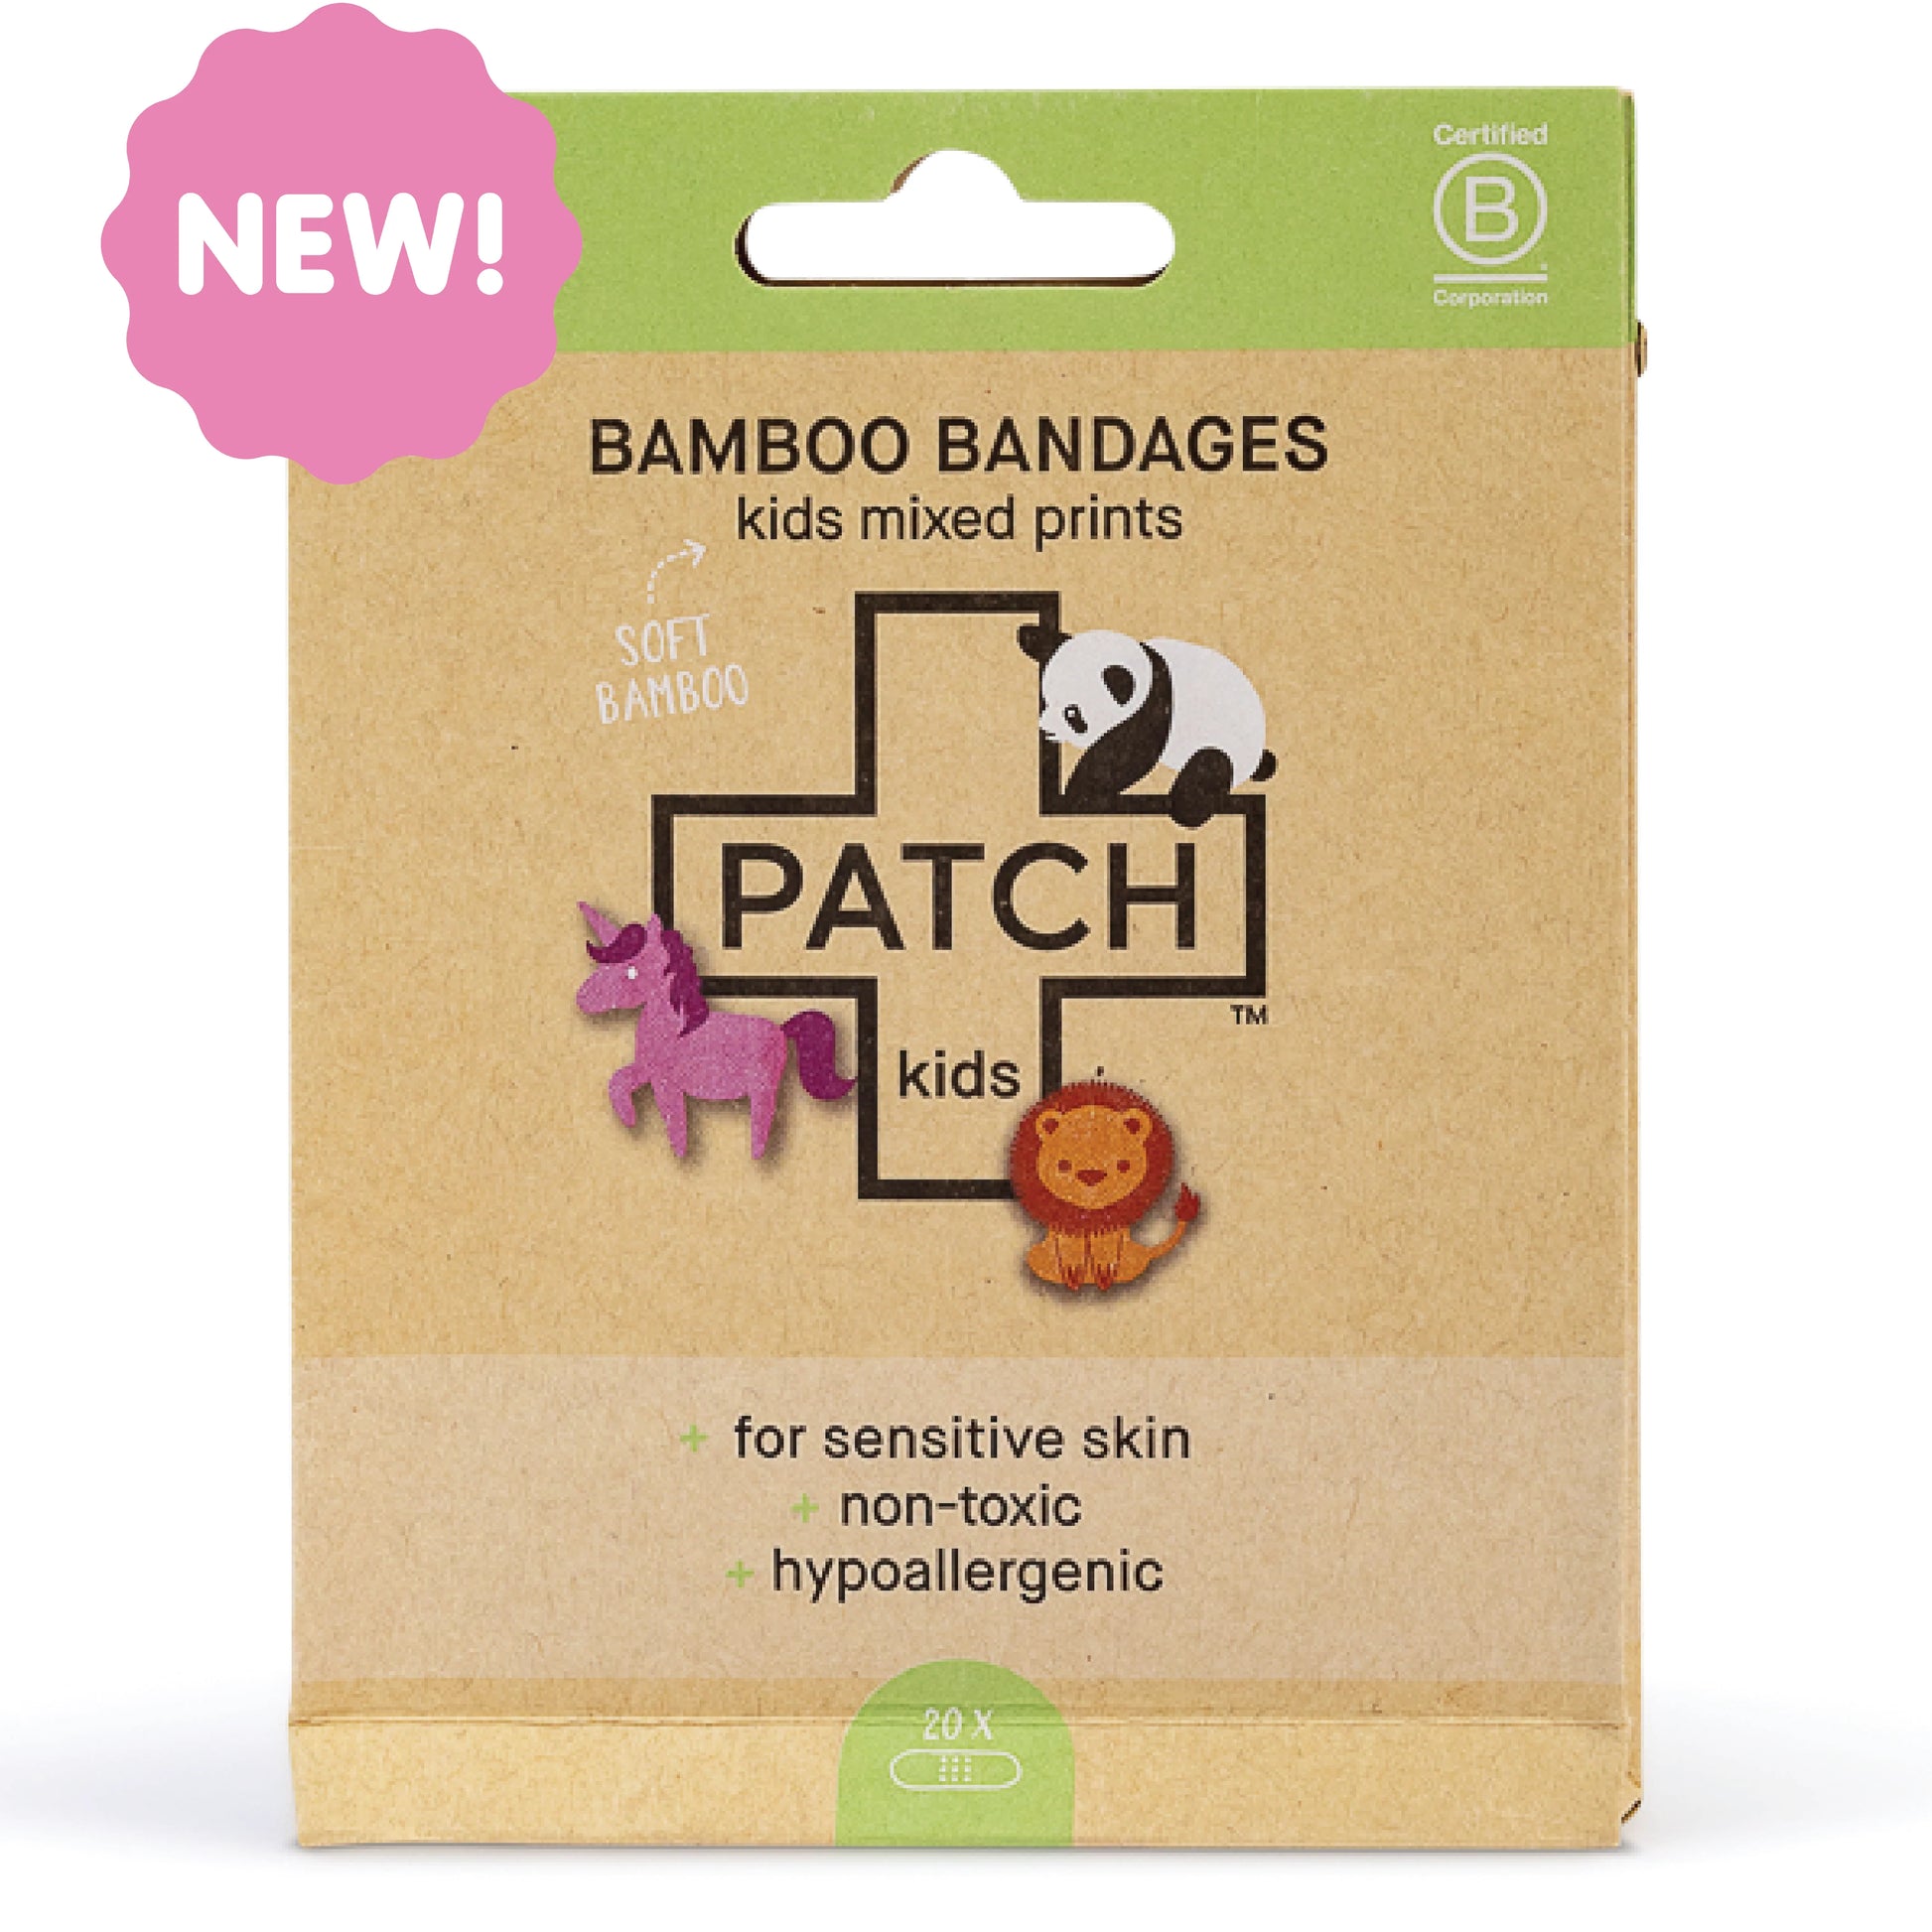 Patch Bamboo Adhesive Bandages Kids Prints